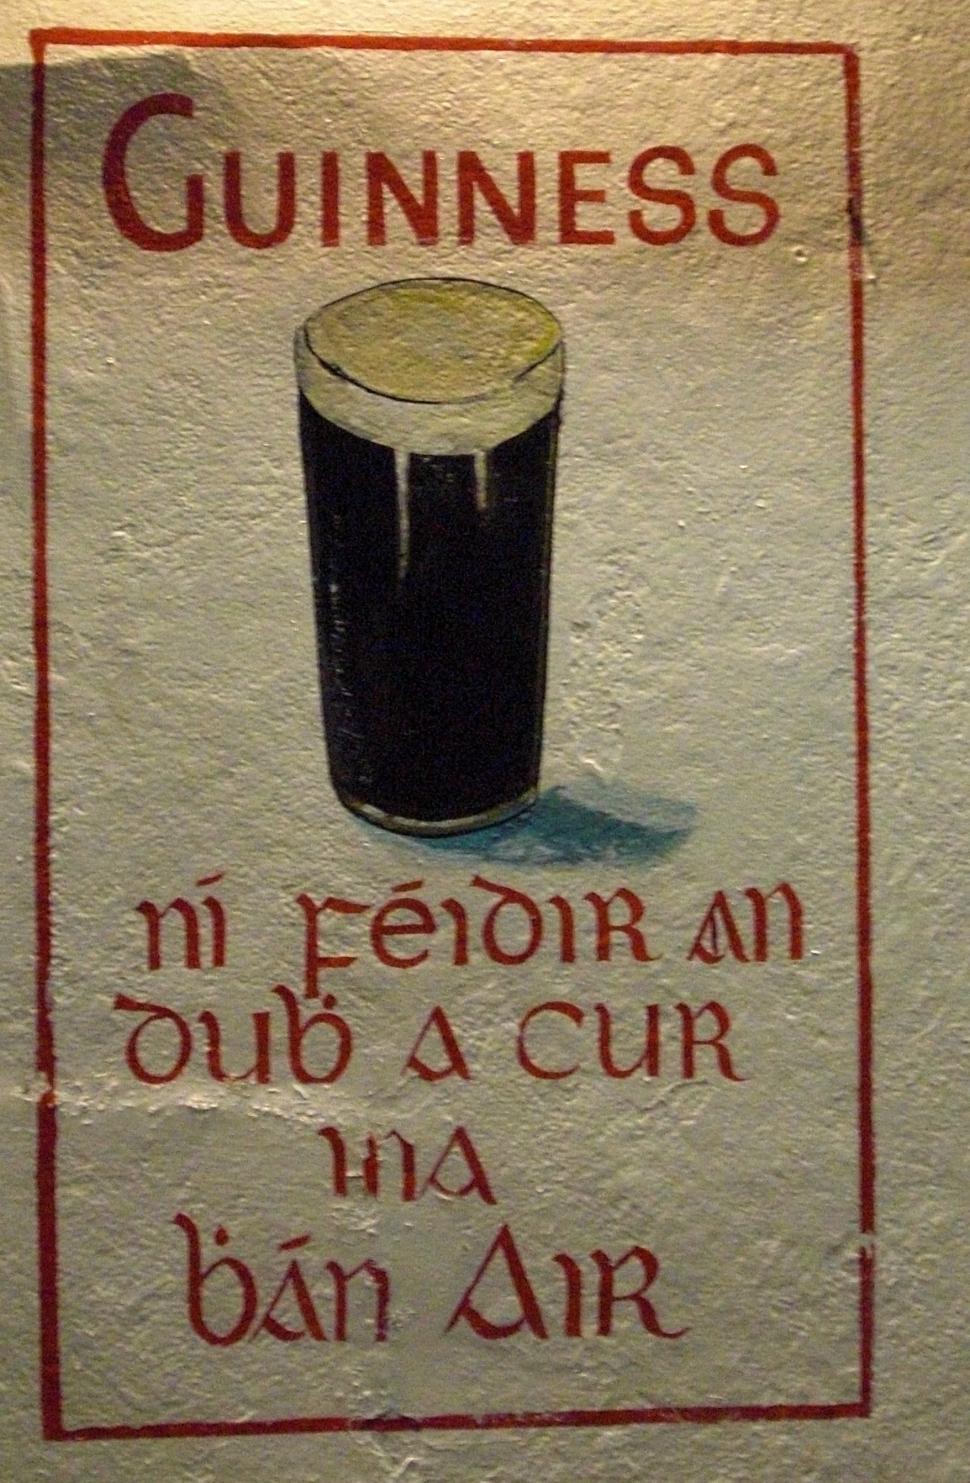 Free Image of Sign Featuring Picture of Pint of Guinness 